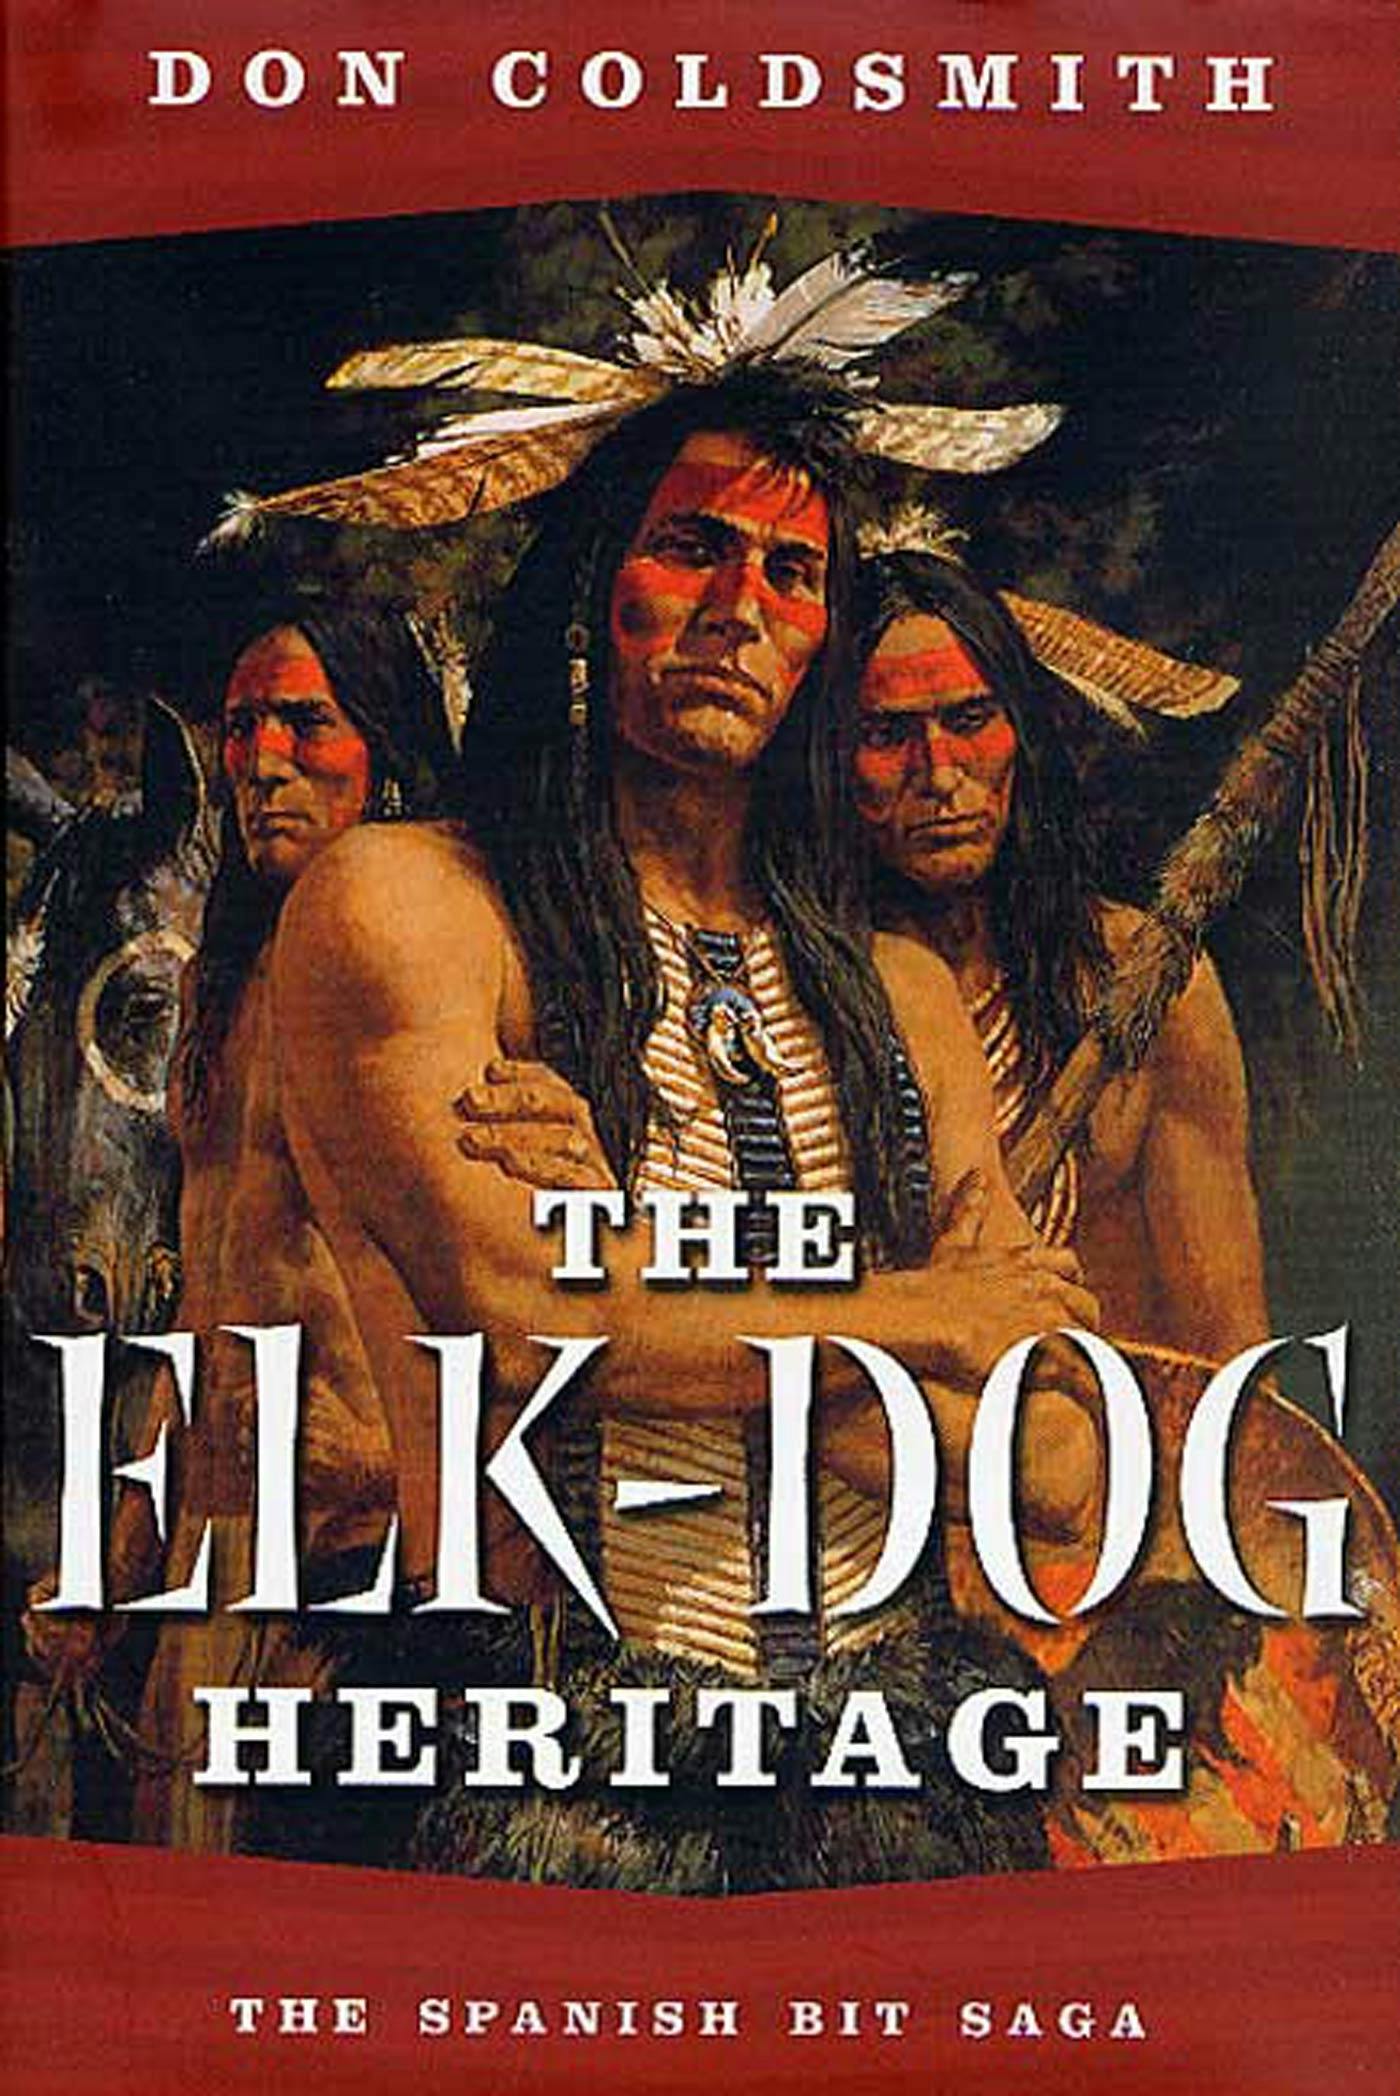 Cover for the book titled as: The Elk-Dog Heritage